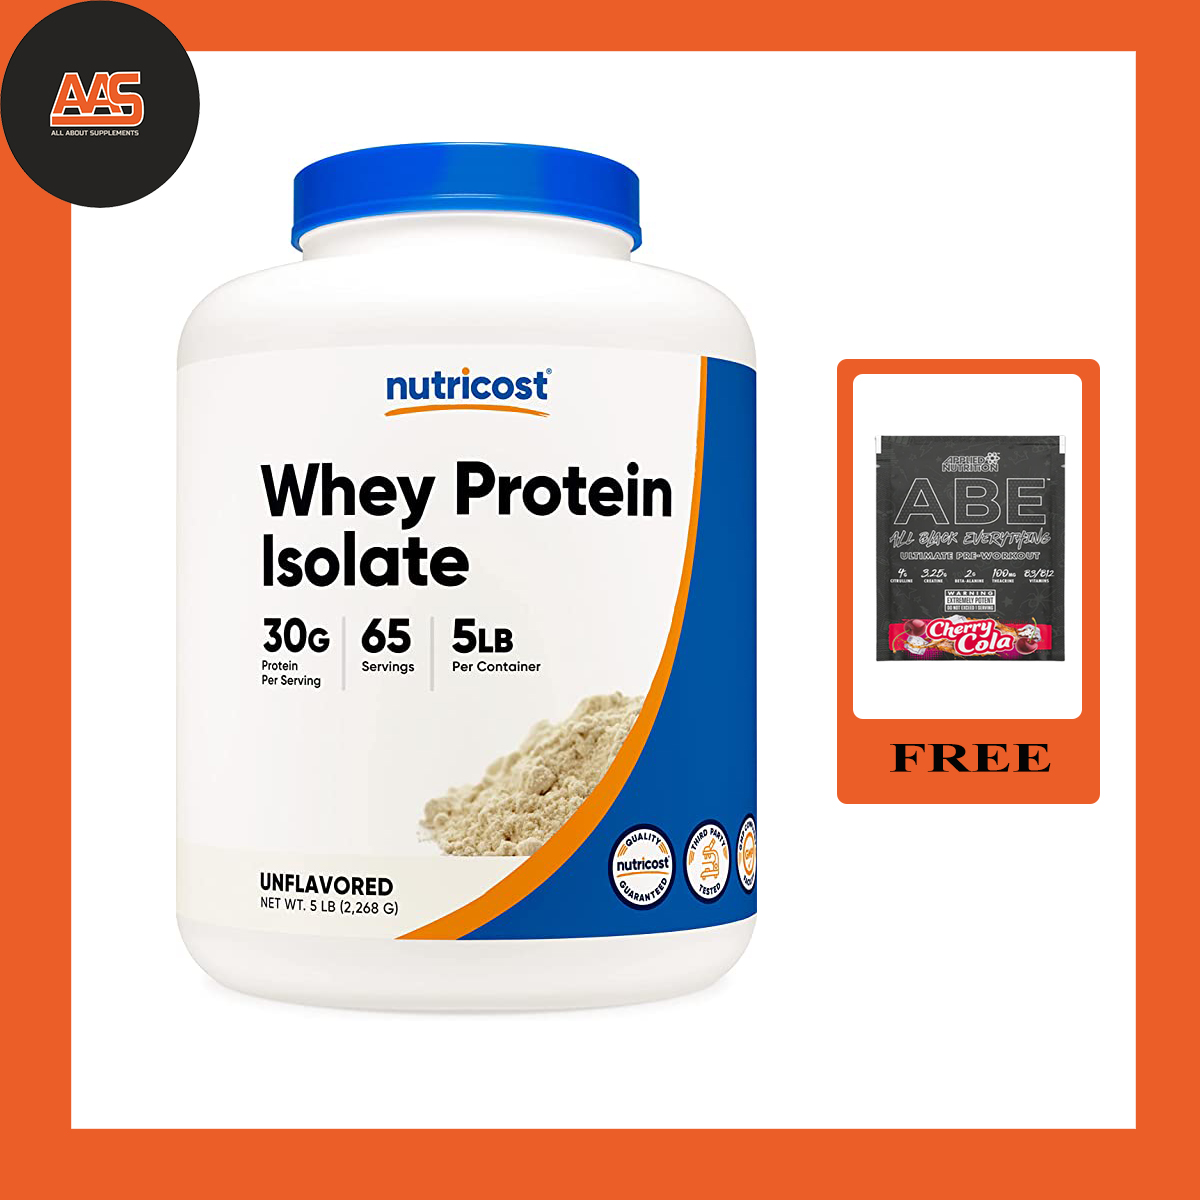 WHEY PROTEIN - NUTRICOST - WHEY PROTEIN ISOLATE - 5LBS